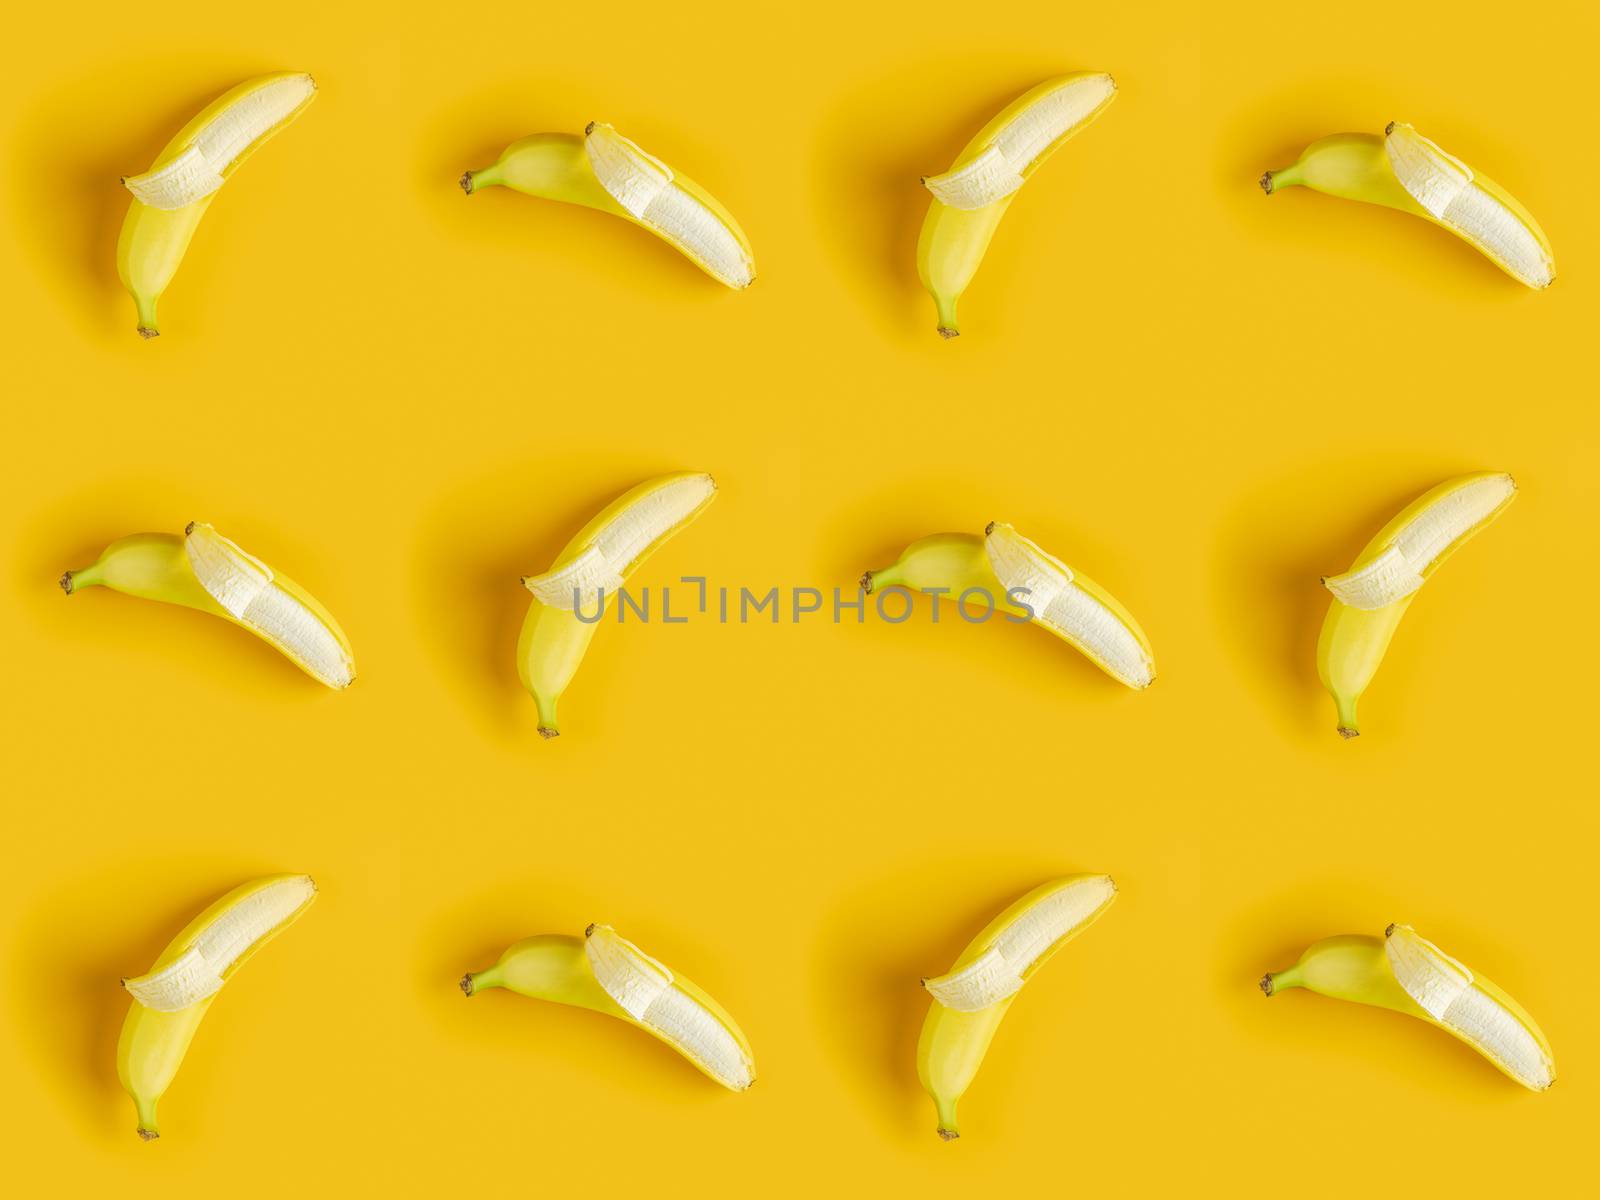 Tropical abstract background. Juicy ripe banana pattern on yellow background top.  Seamless pattern with bananas.